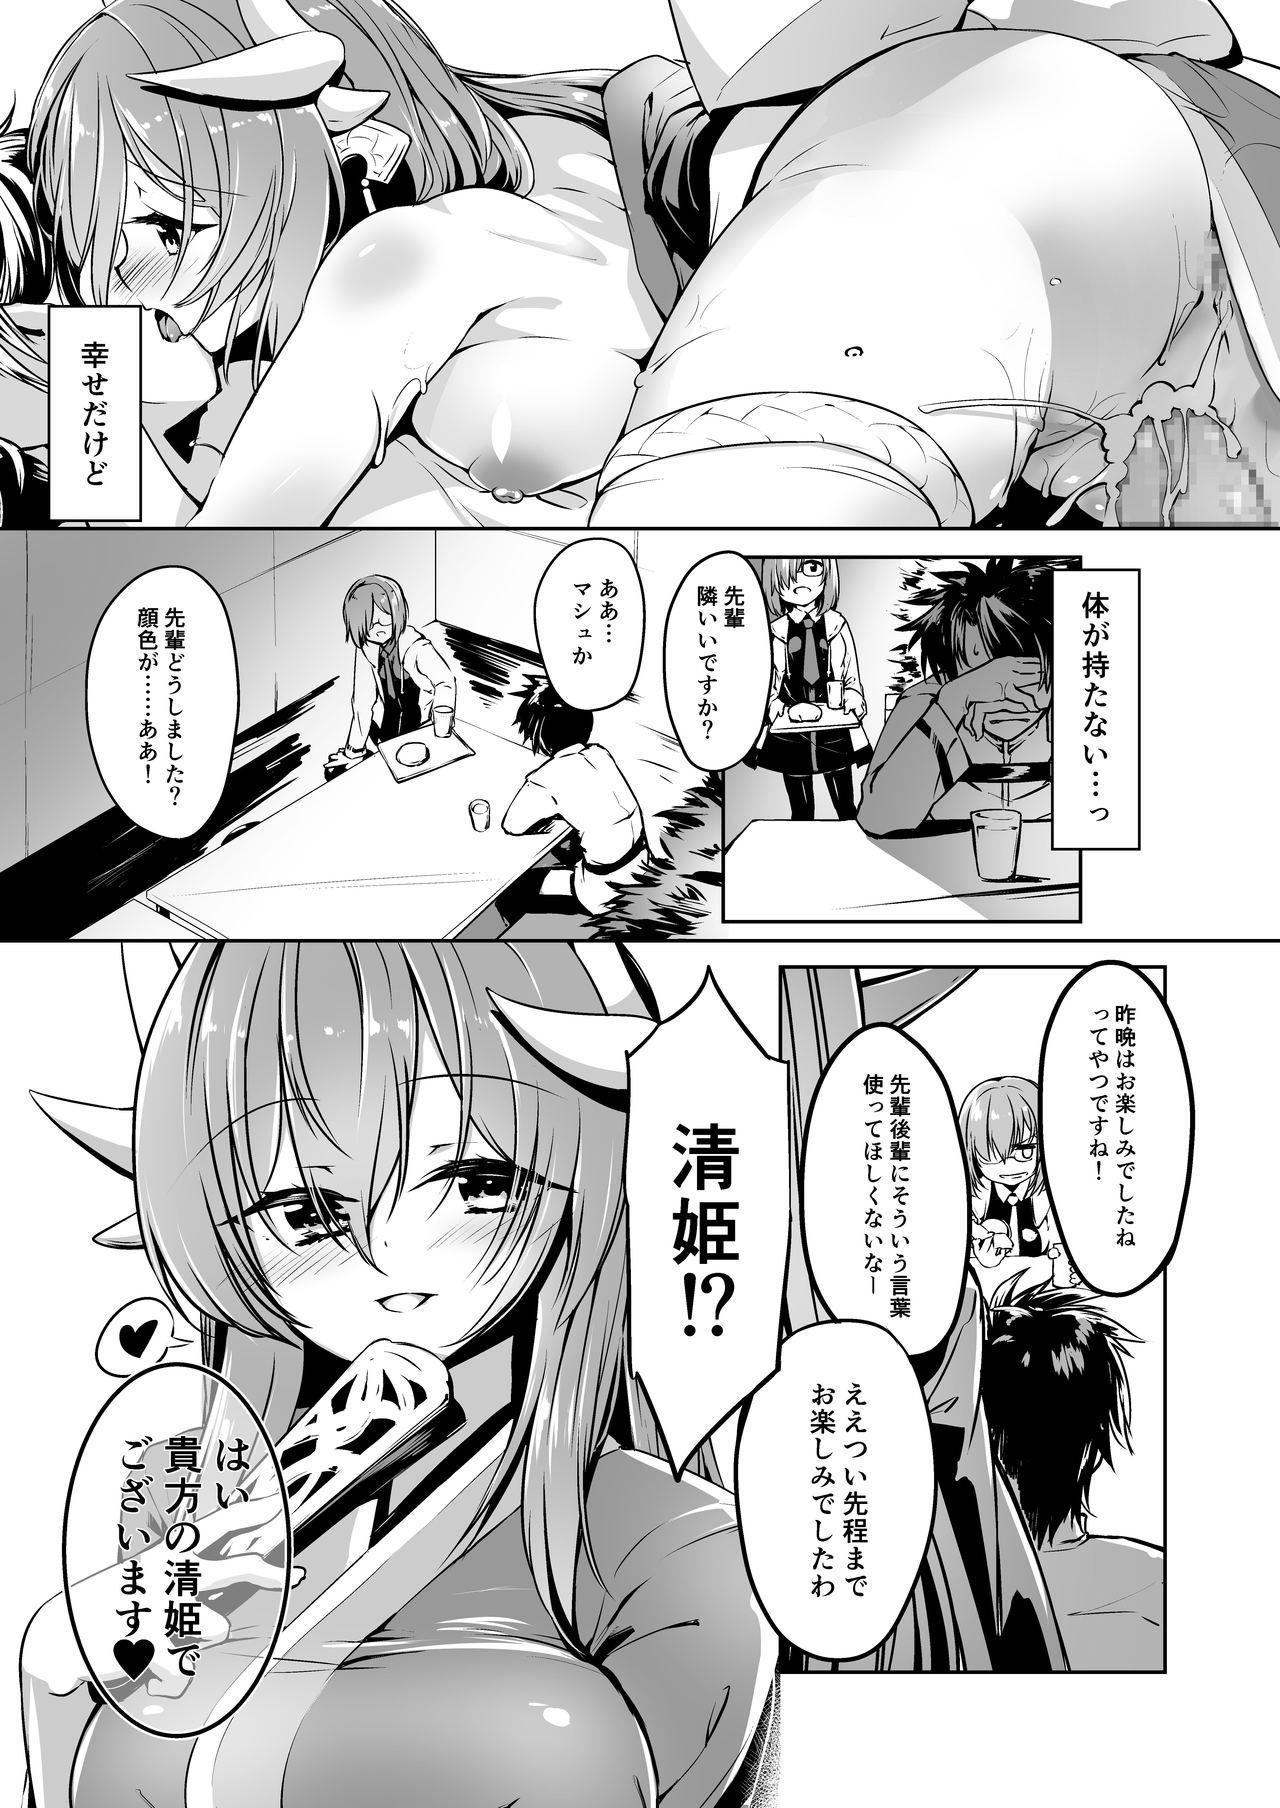 Cocks Kiyohime Lovers vol. 02 - Fate grand order Boob - Page 6